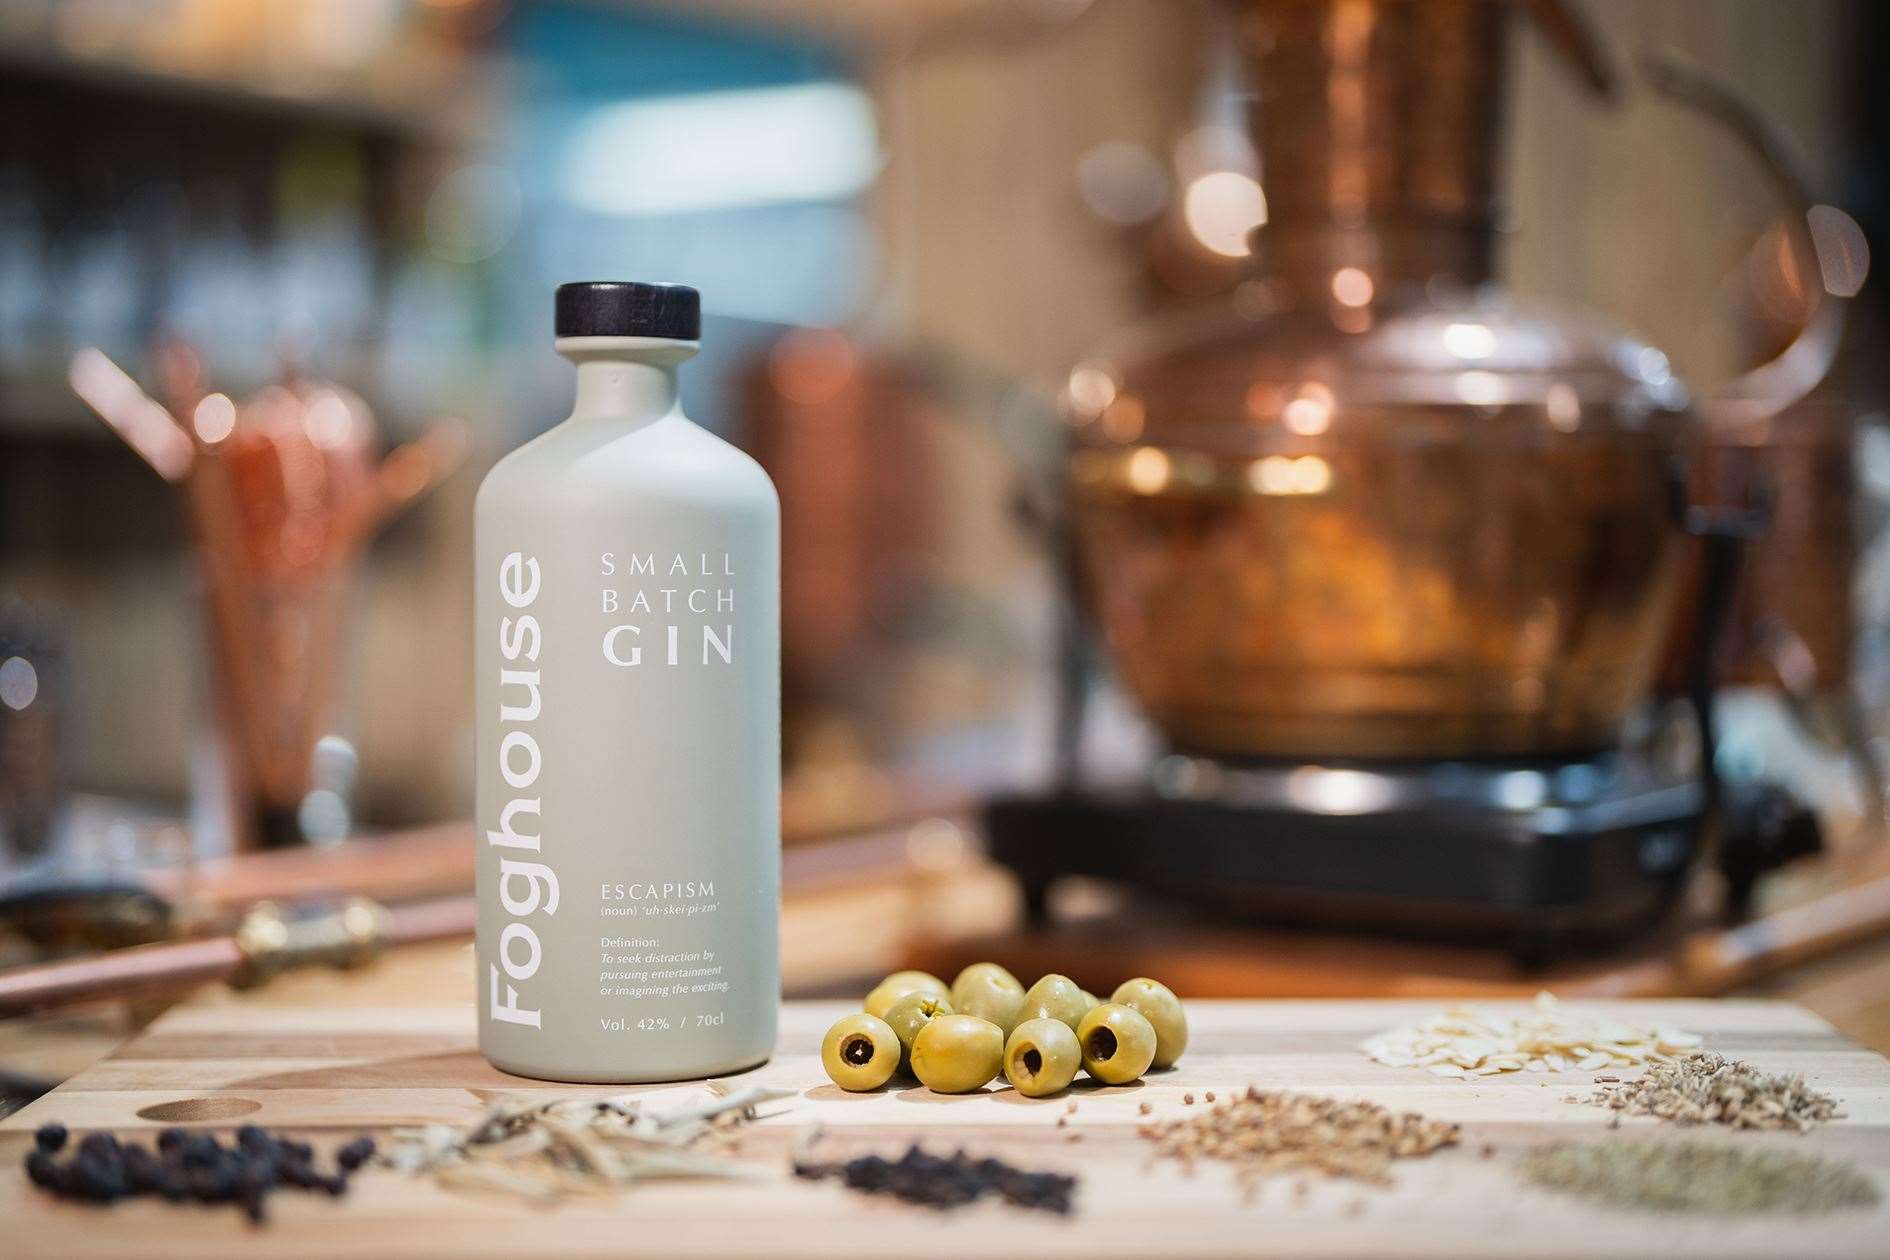 Foghouse gin is handcrafted from nine botanicals.